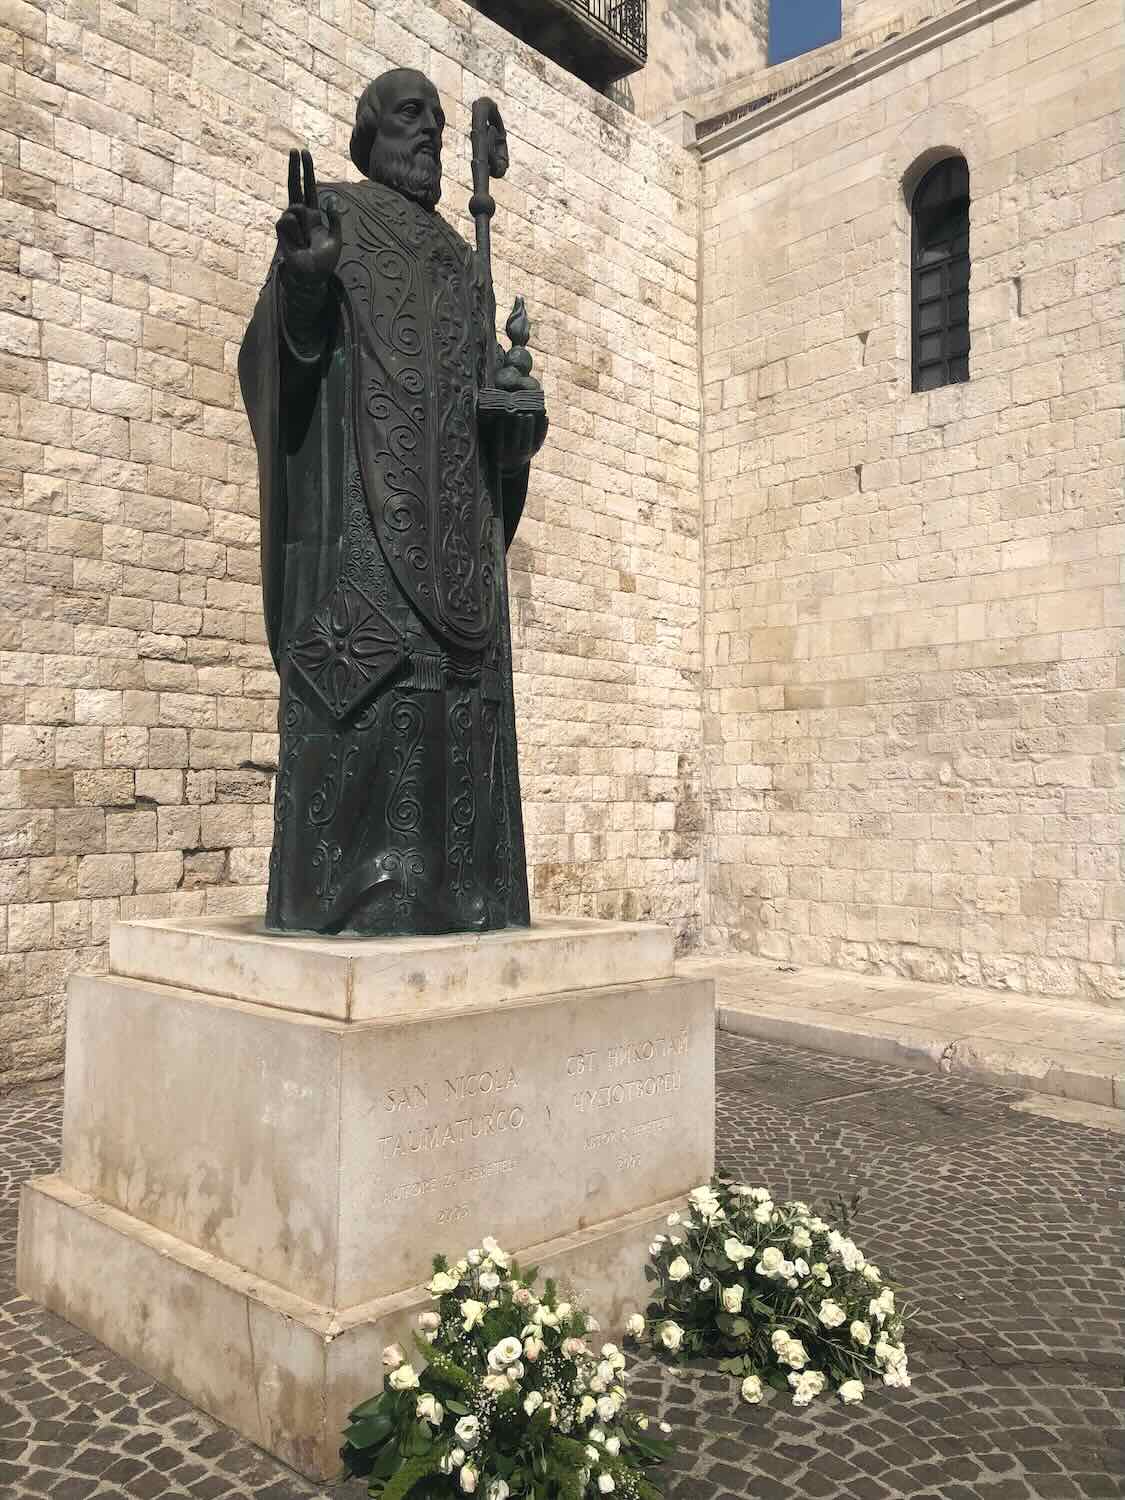 A bronze statue of Saint Nicholas holding a staff and giving a blessing gesture, set on a stone pedestal with inscriptions. The statue is surrounded by white flowers and is positioned against a backdrop of old stone walls.